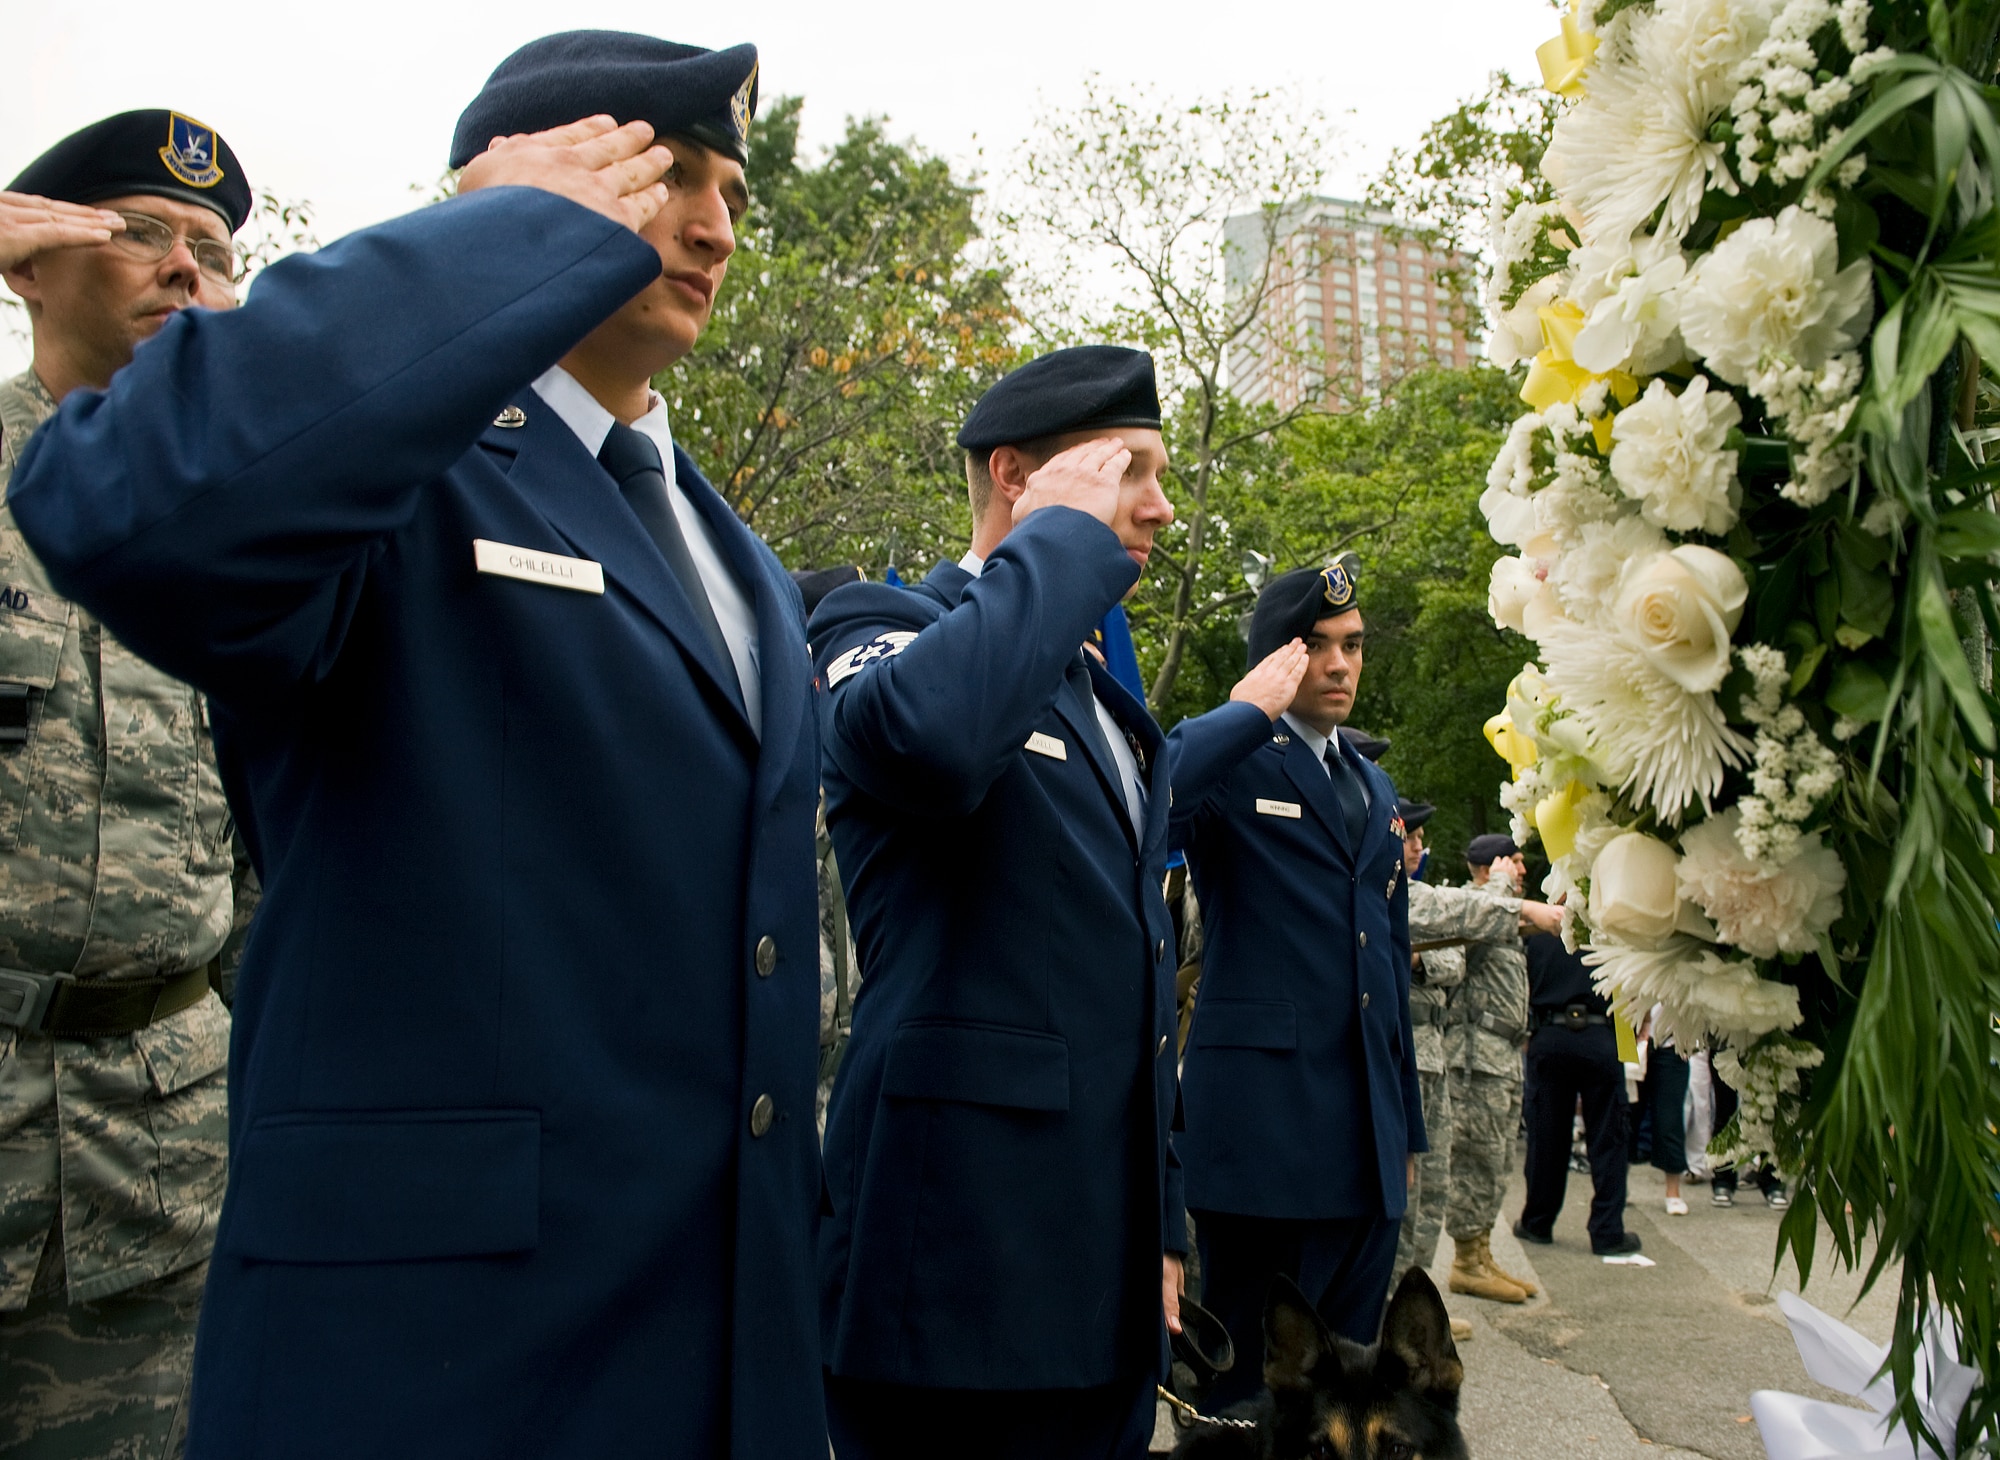 After two months and 2,100 miles of marching, U.S. Air Force Security Forces airmen give a solemn salute during a wreath laying ceremony in honor of the security forces defenders and Americans who died on 9/11 and in the ensuing wars at the culmination of the Security Forces 9/11 Ruck to Remember march in Battery Park, N.Y., Sept. 11. The last leg of their march began at the Intrepid Sea, Air and Space Museum and ended at Battery Park, where 2,796 flags covered the area to honor each person who died on 9/11.(U.S. Air Force photo/Tech. Sgt. Bennie J. Davis III)